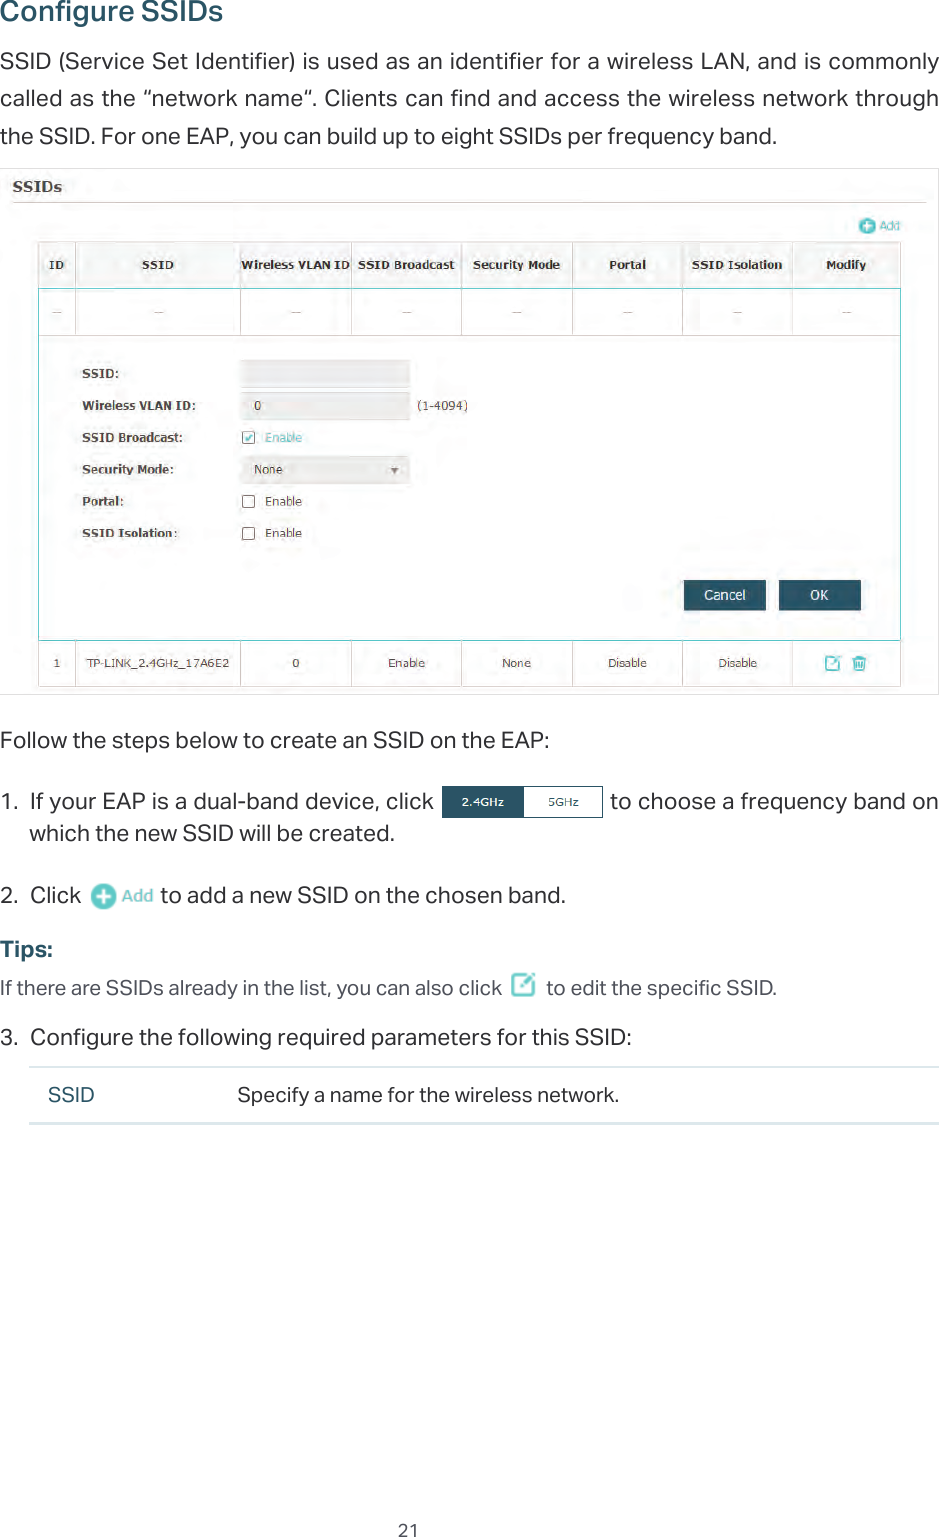  21Configure SSIDsSSID (Service Set Identifier) is used as an identifier for a wireless LAN, and is commonly called as the “network name“. Clients can find and access the wireless network through the SSID. For one EAP, you can build up to eight SSIDs per frequency band.Follow the steps below to create an SSID on the EAP:1. If your EAP is a dual-band device, click   to choose a frequency band on which the new SSID will be created.2. Click   to add a new SSID on the chosen band.Tips:If there are SSIDs already in the list, you can also click   to edit the specific SSID.3. Configure the following required parameters for this SSID:SSID Specify a name for the wireless network.